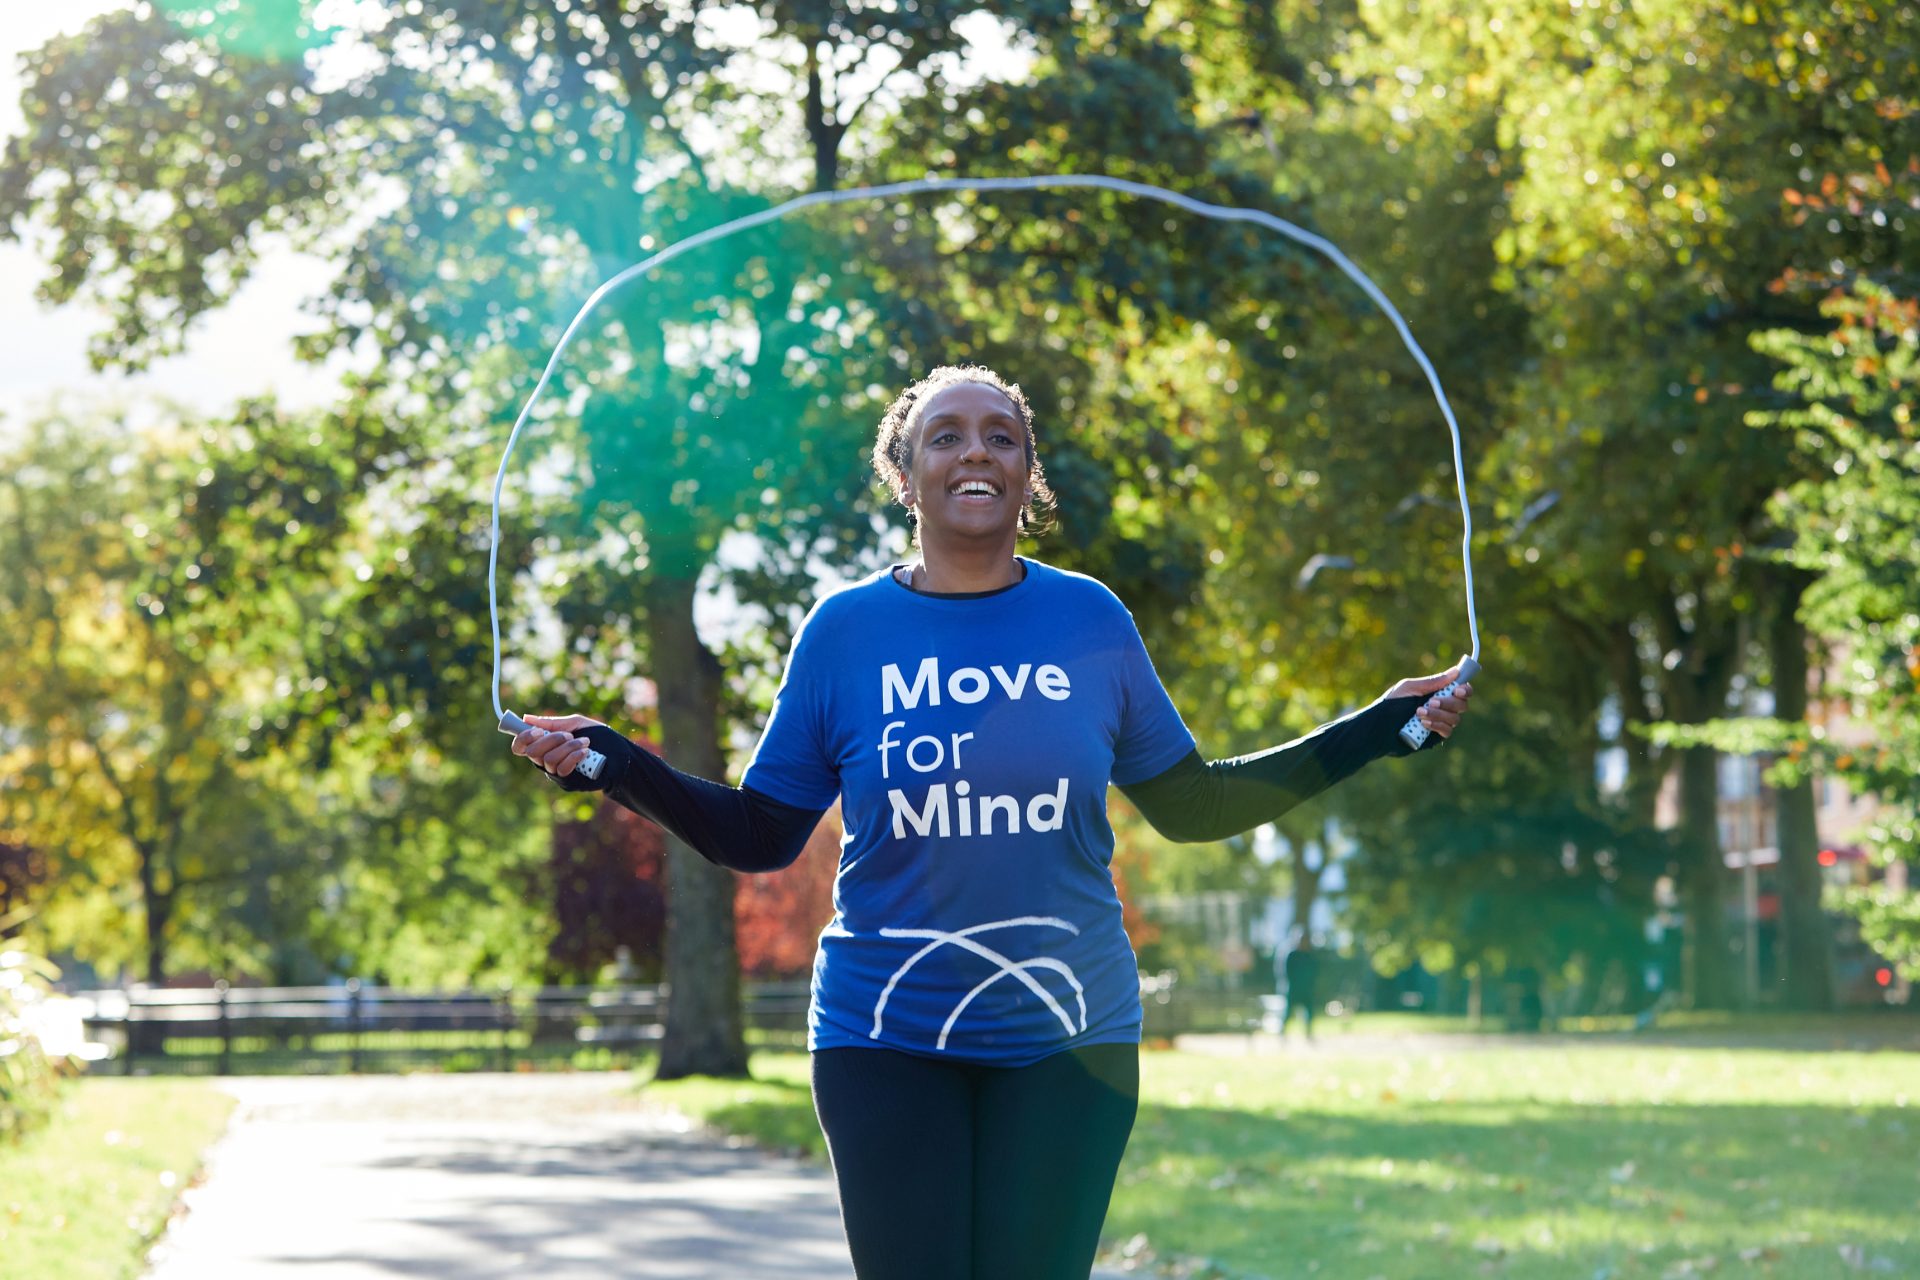 Register for our ‘Move for Mind’ Fundraising Challenge